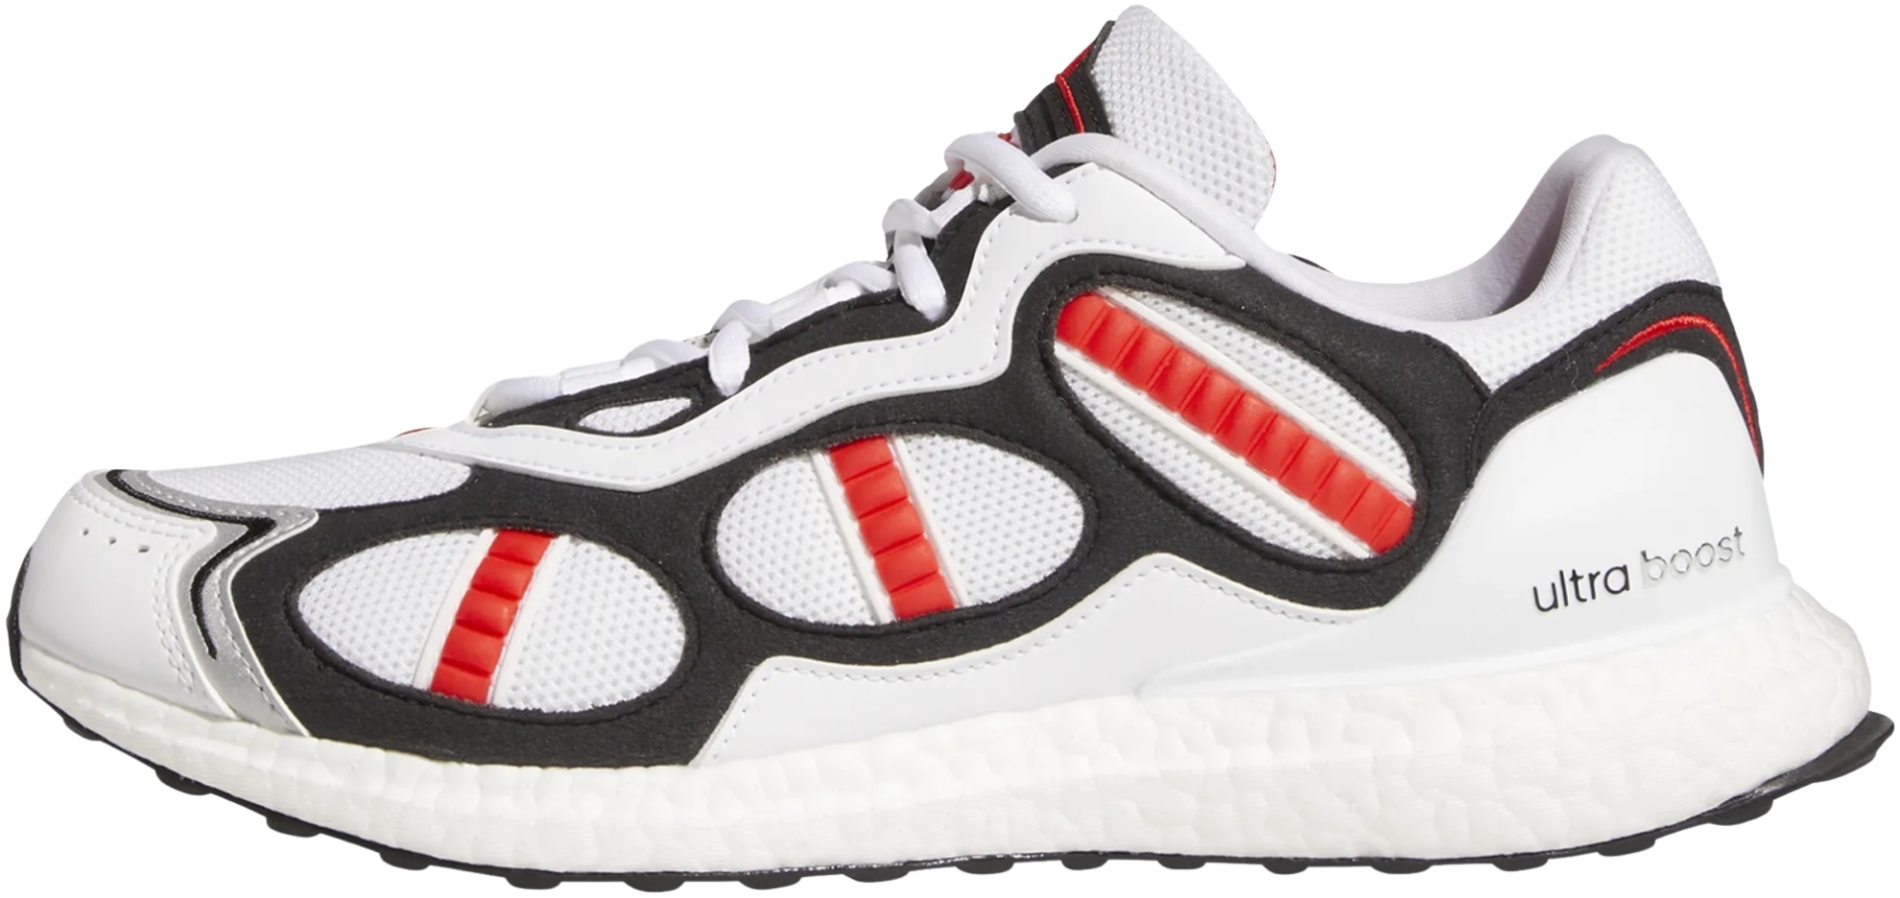 latitud Monumento rival Adidas Ultraboost Supernova DNA sneakers in white (only $100) | RunRepeat